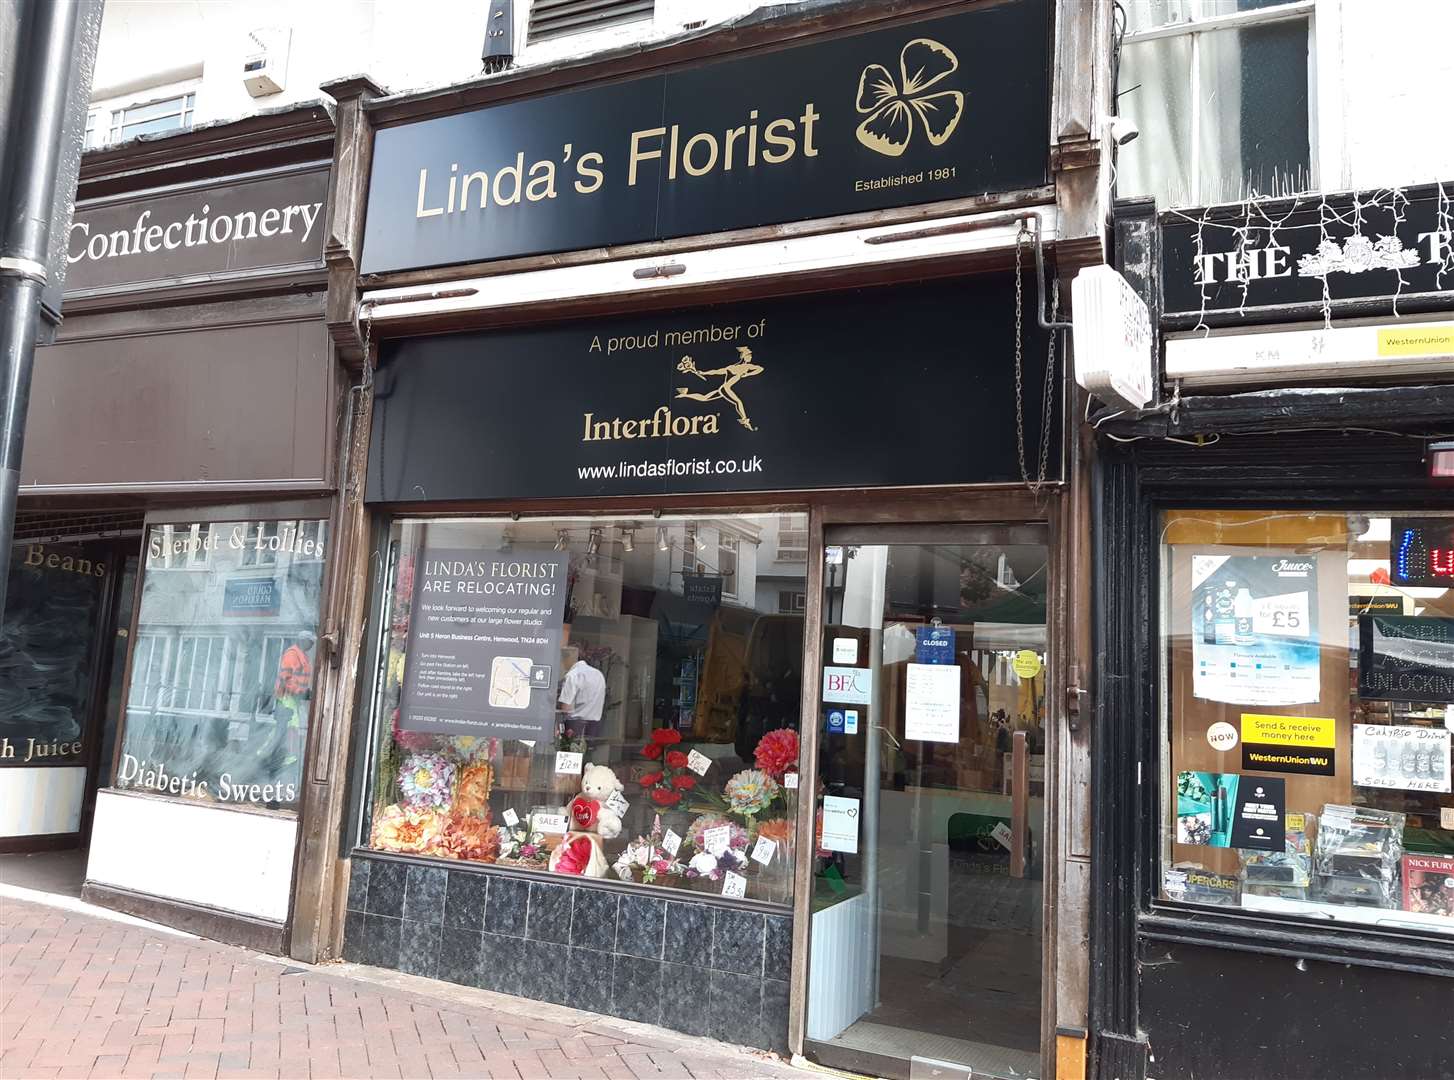 Linda's Florist is leaving the town centre